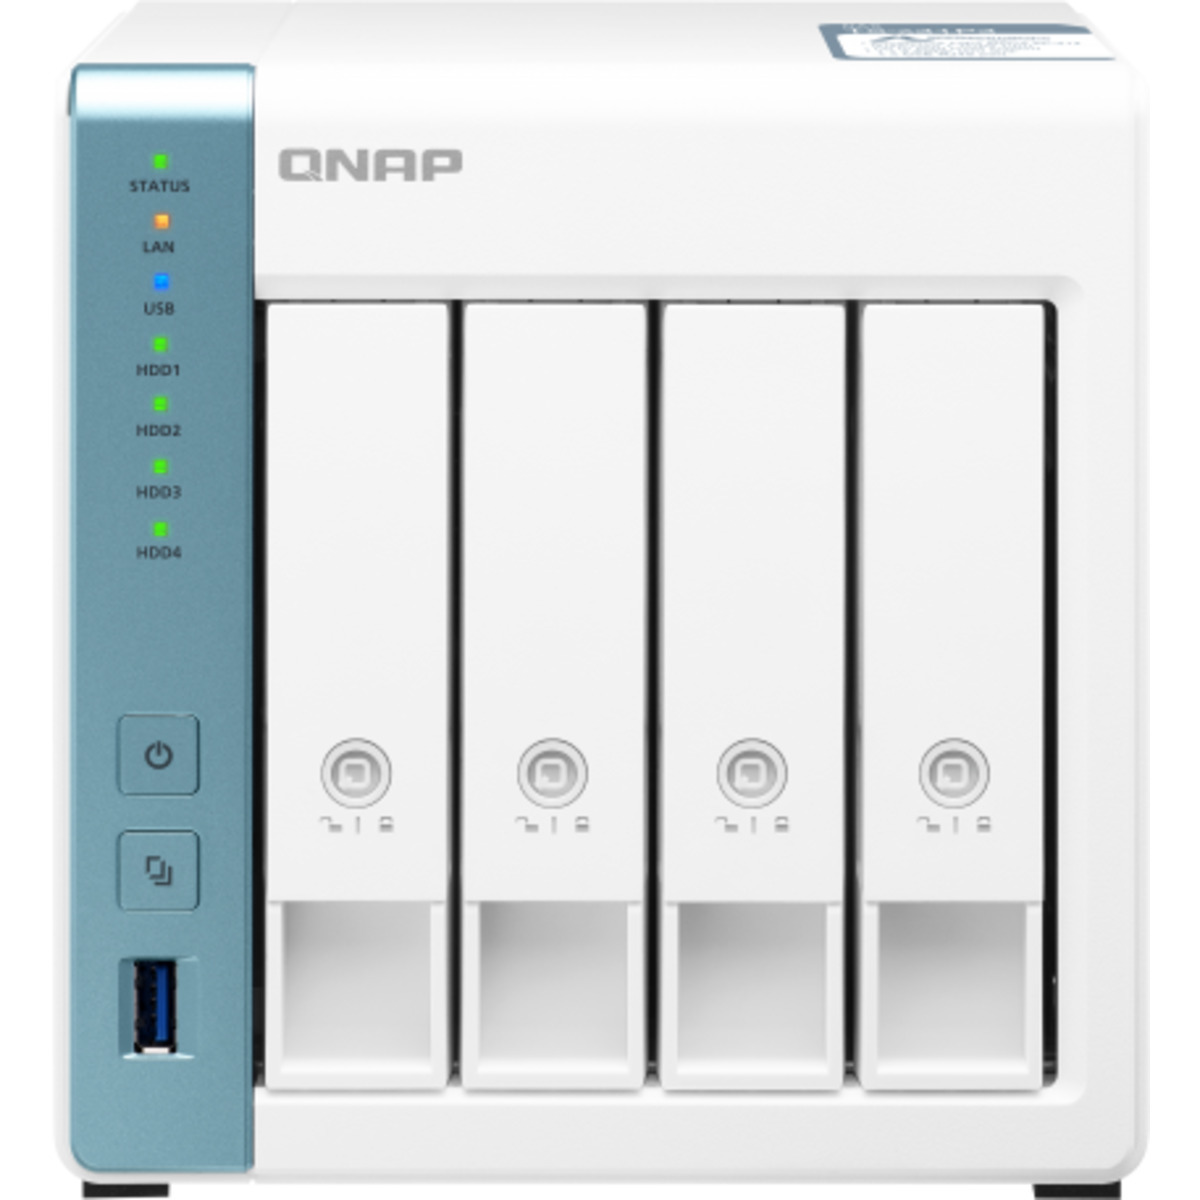 buy $2345 QNAP TS-431P3 72tb Desktop NAS - Network Attached Storage Device 4x18000gb Toshiba Enterprise Capacity MG09ACA18TE 3.5 7200rpm SATA 6Gb/s HDD ENTERPRISE Class Drives Installed - Burn-In Tested - FREE RAM UPGRADE - nas headquarters buy network attached storage server device das new raid-5 free shipping usa christmas new year holiday sale TS-431P3